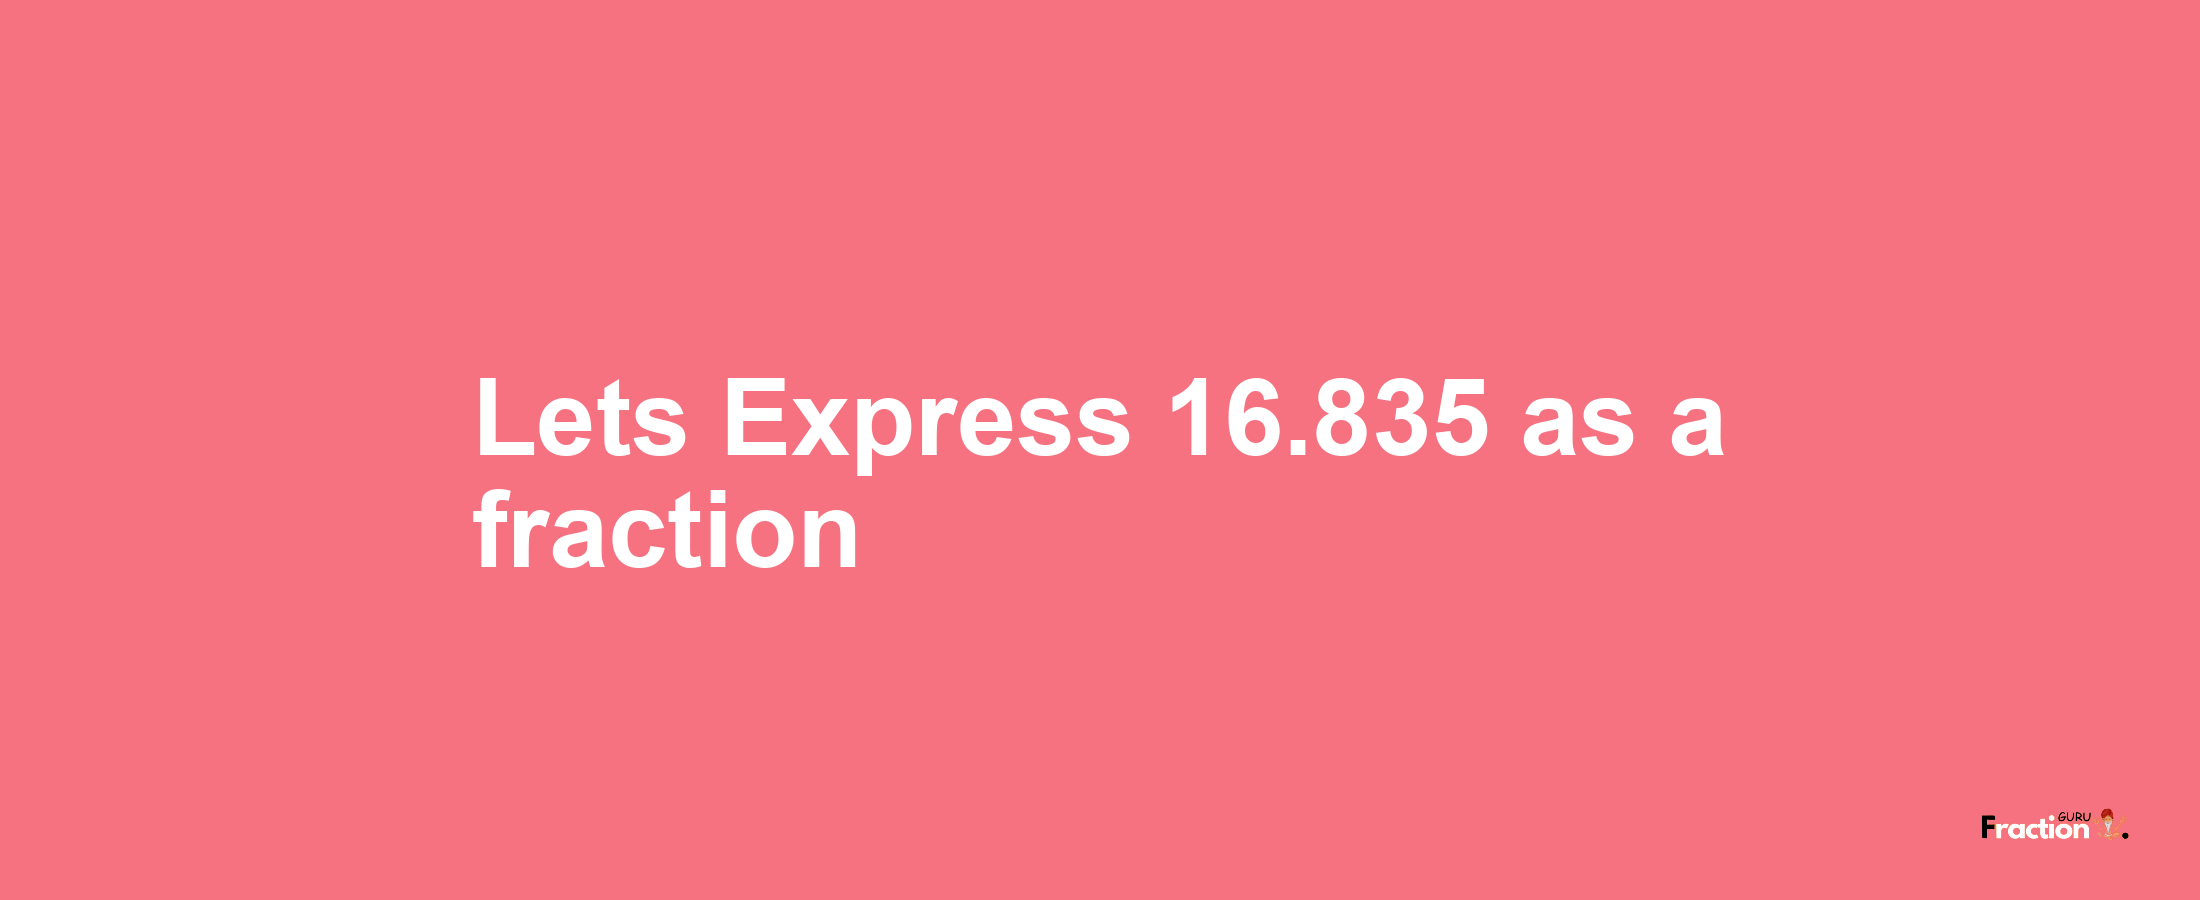 Lets Express 16.835 as afraction